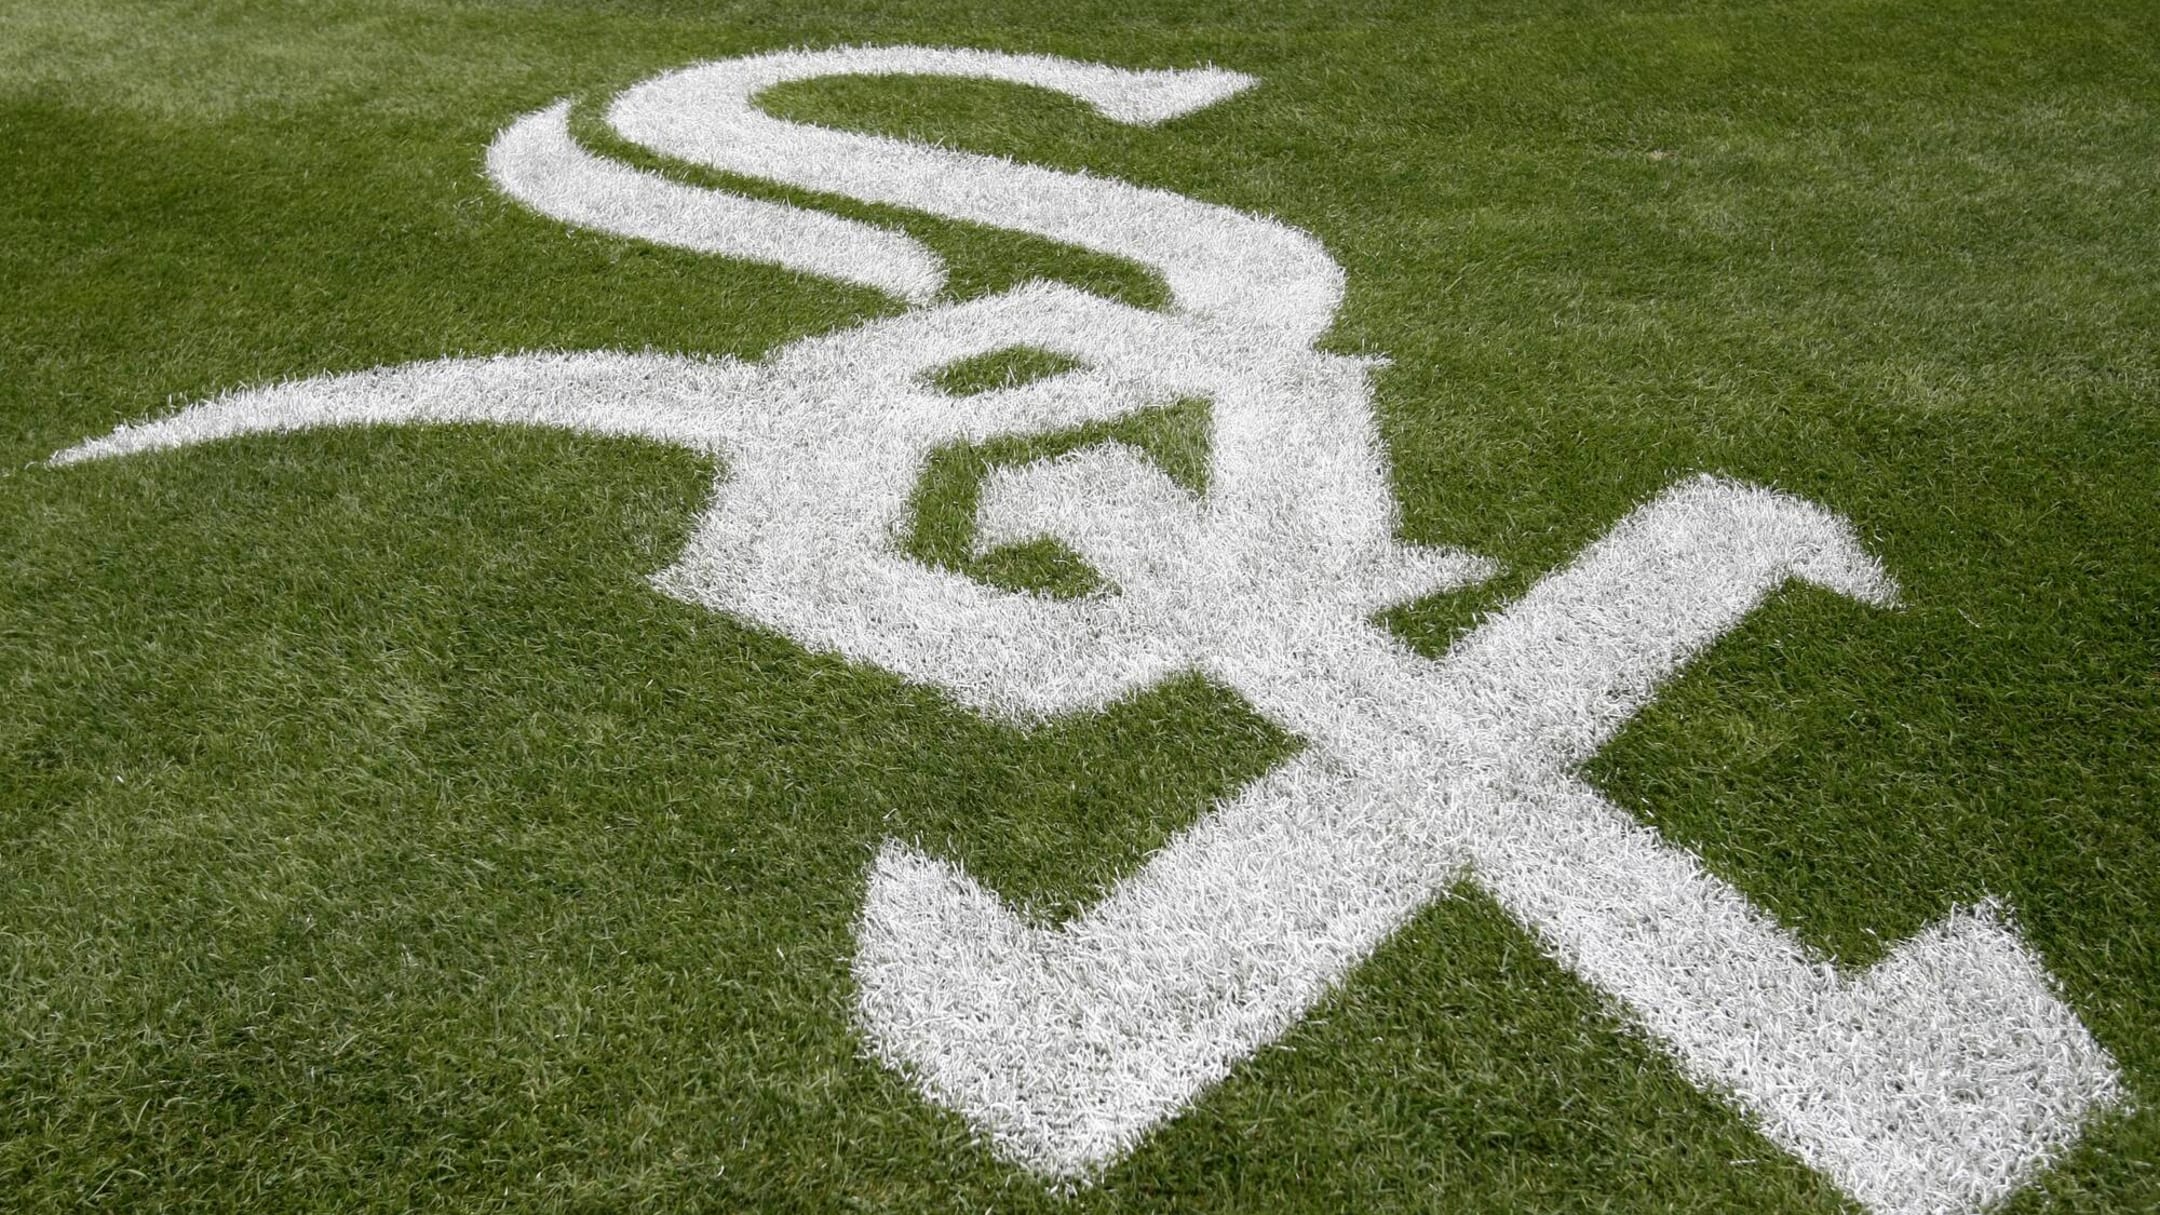 Chicago White Sox: 3 things to watch in upcoming series